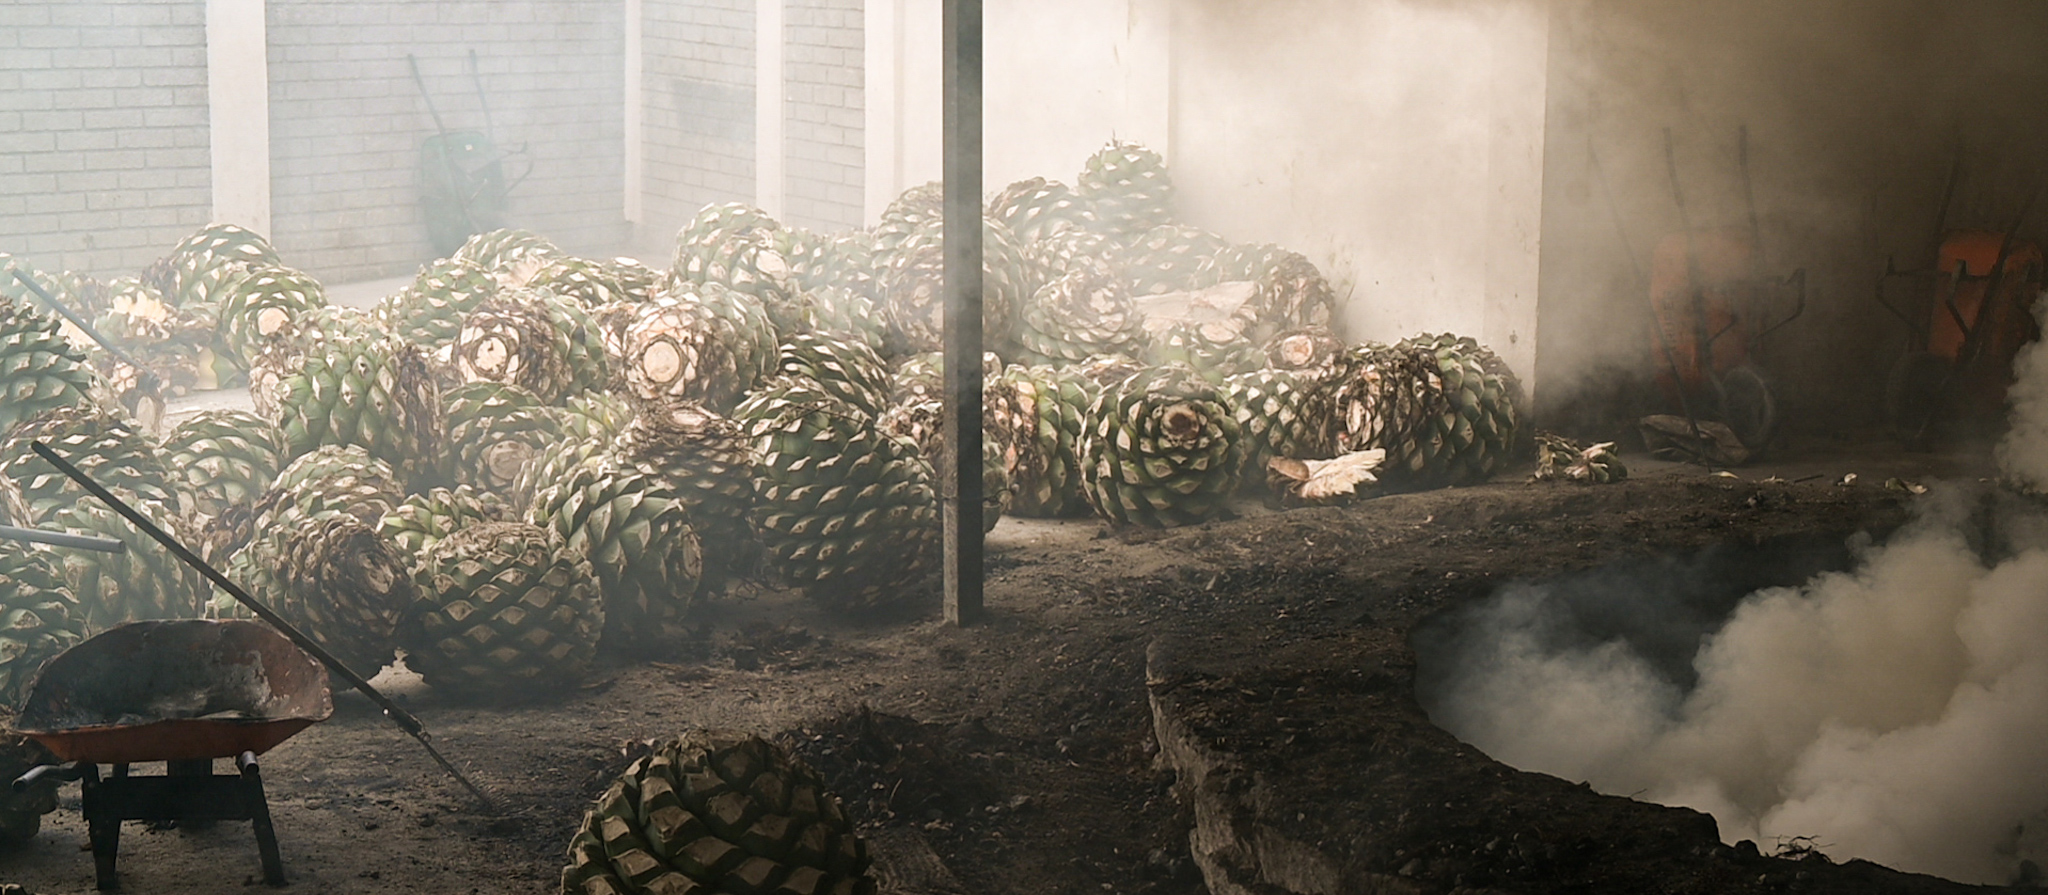 Agave is roasted in earthen pits lined with river stones. The roasting process takes 5-7 days.